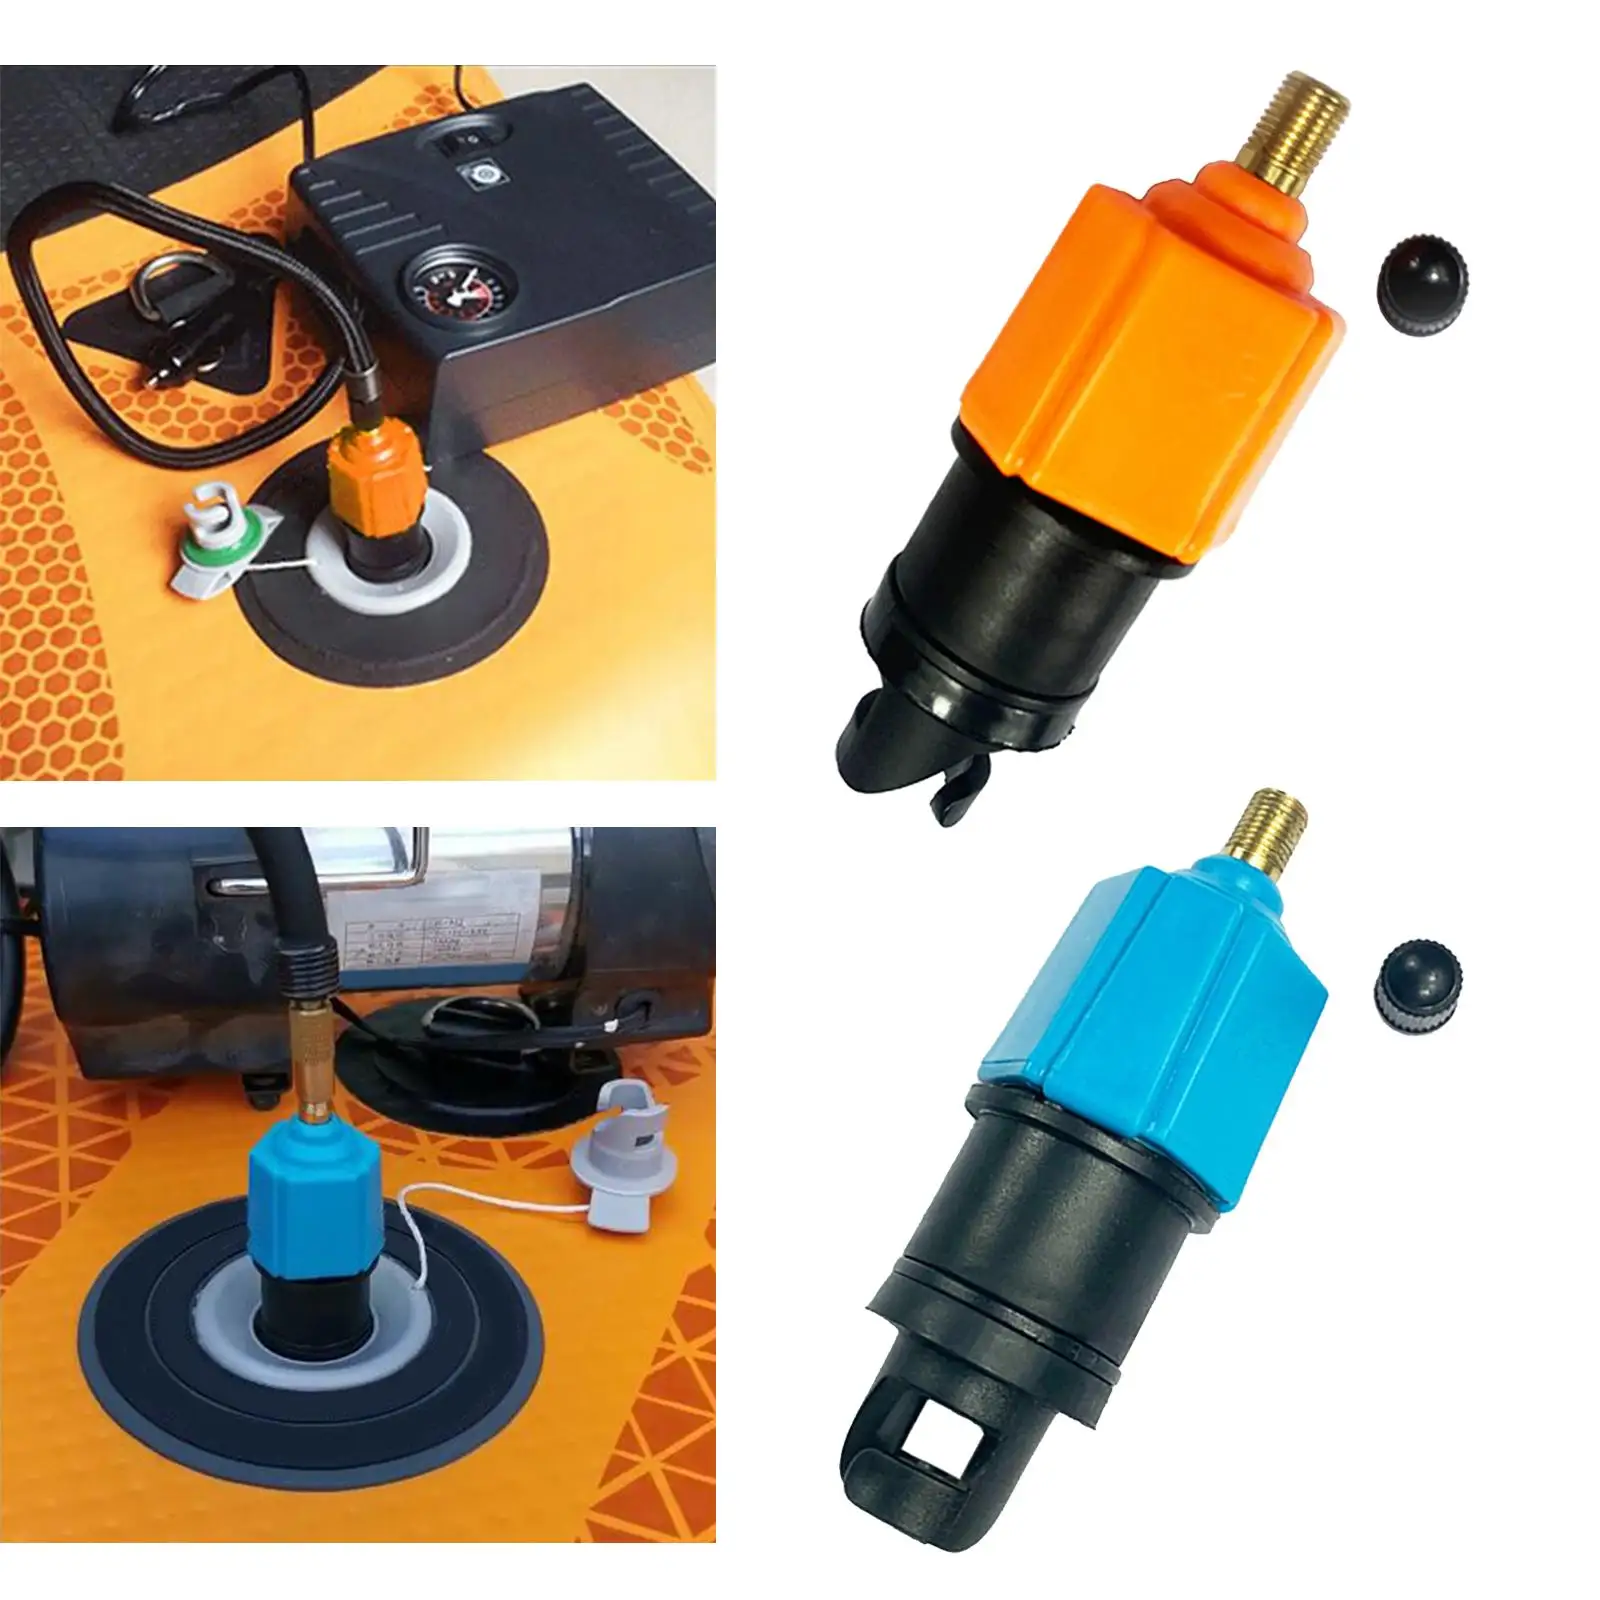 Inflatable Pump Adapter, Canoe Rowing Boat Pumping Nozzle, Pump Valve Adaptor for Kayak,  Board, Inflatable Boat